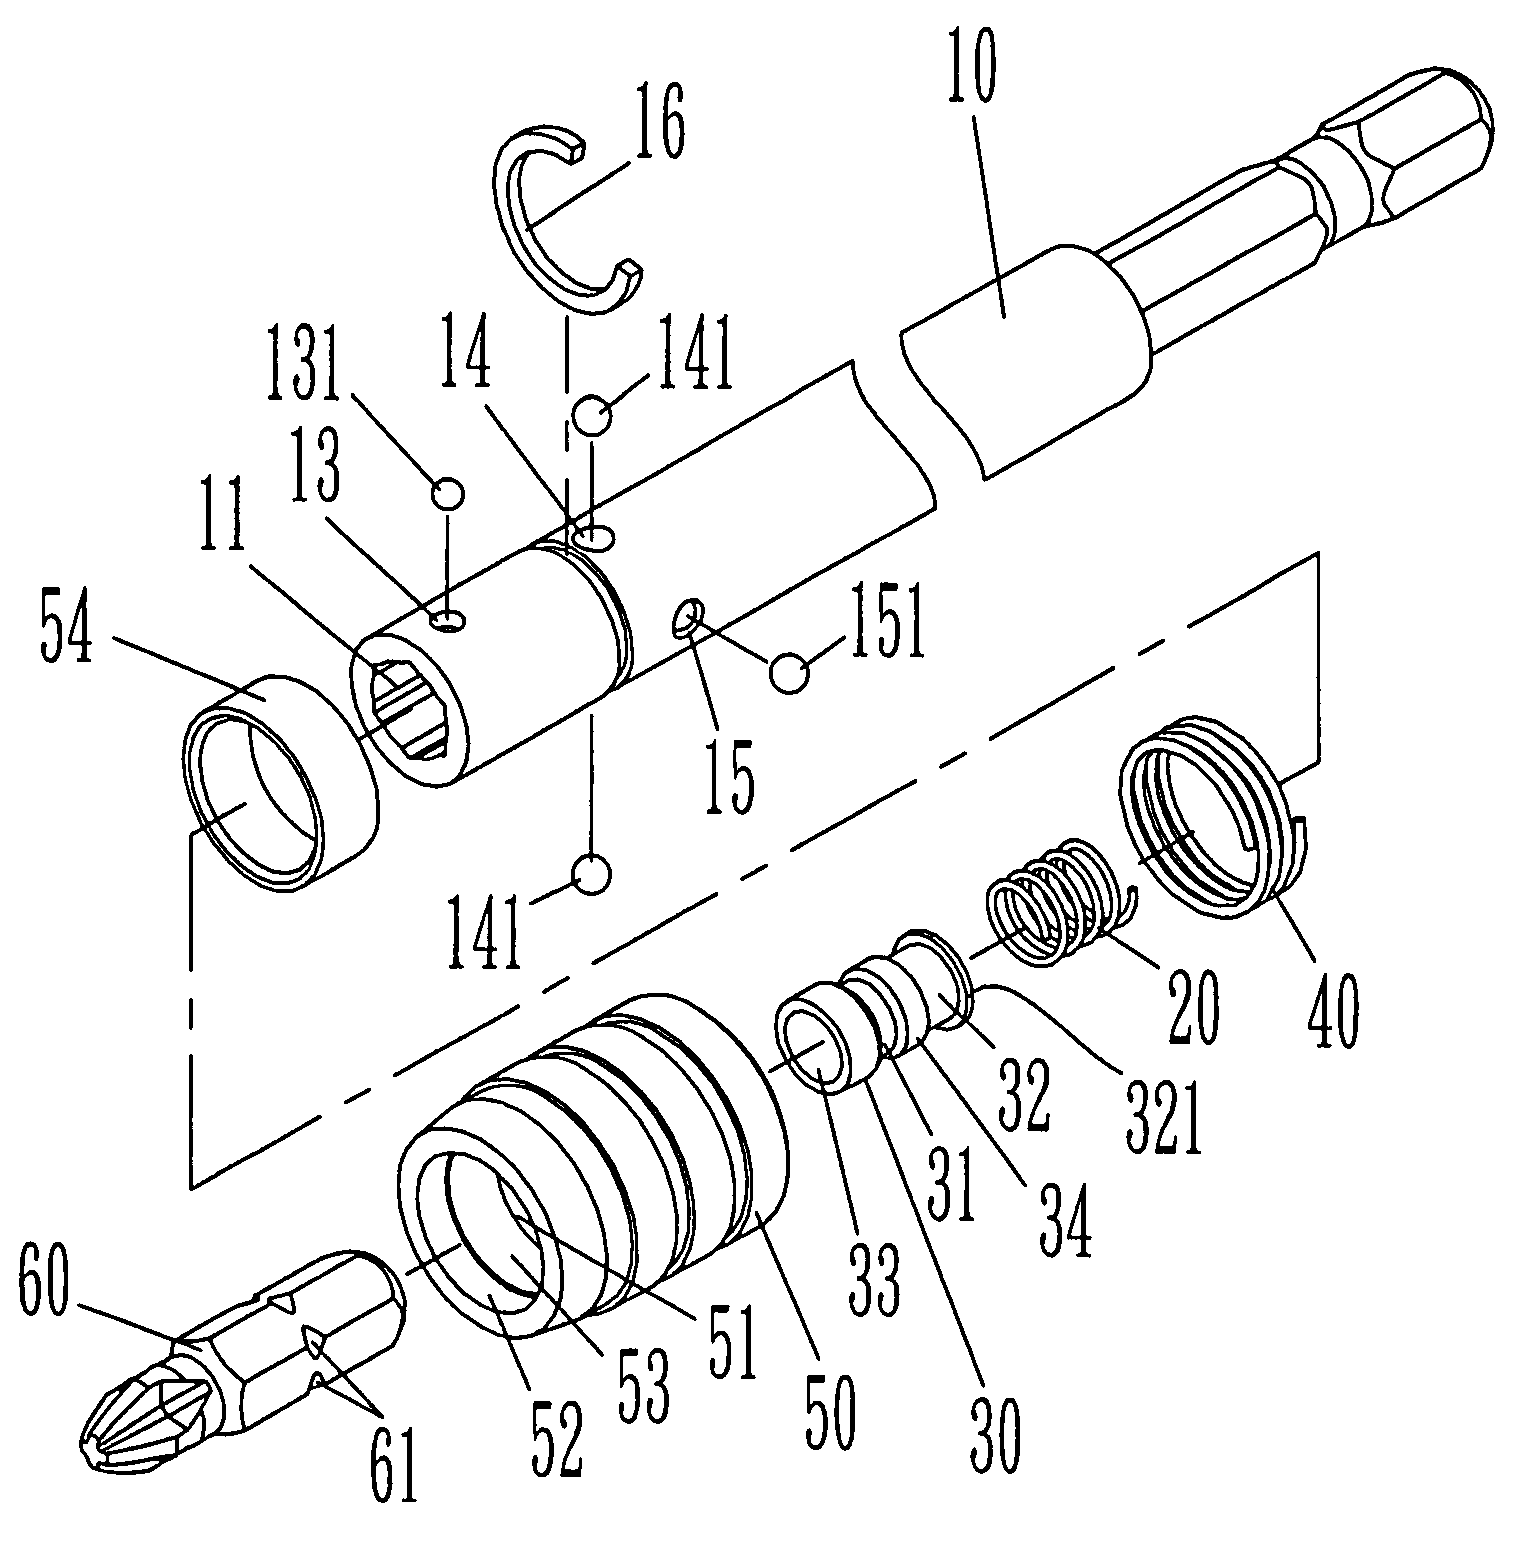 Device for locking and releasing a screw bit